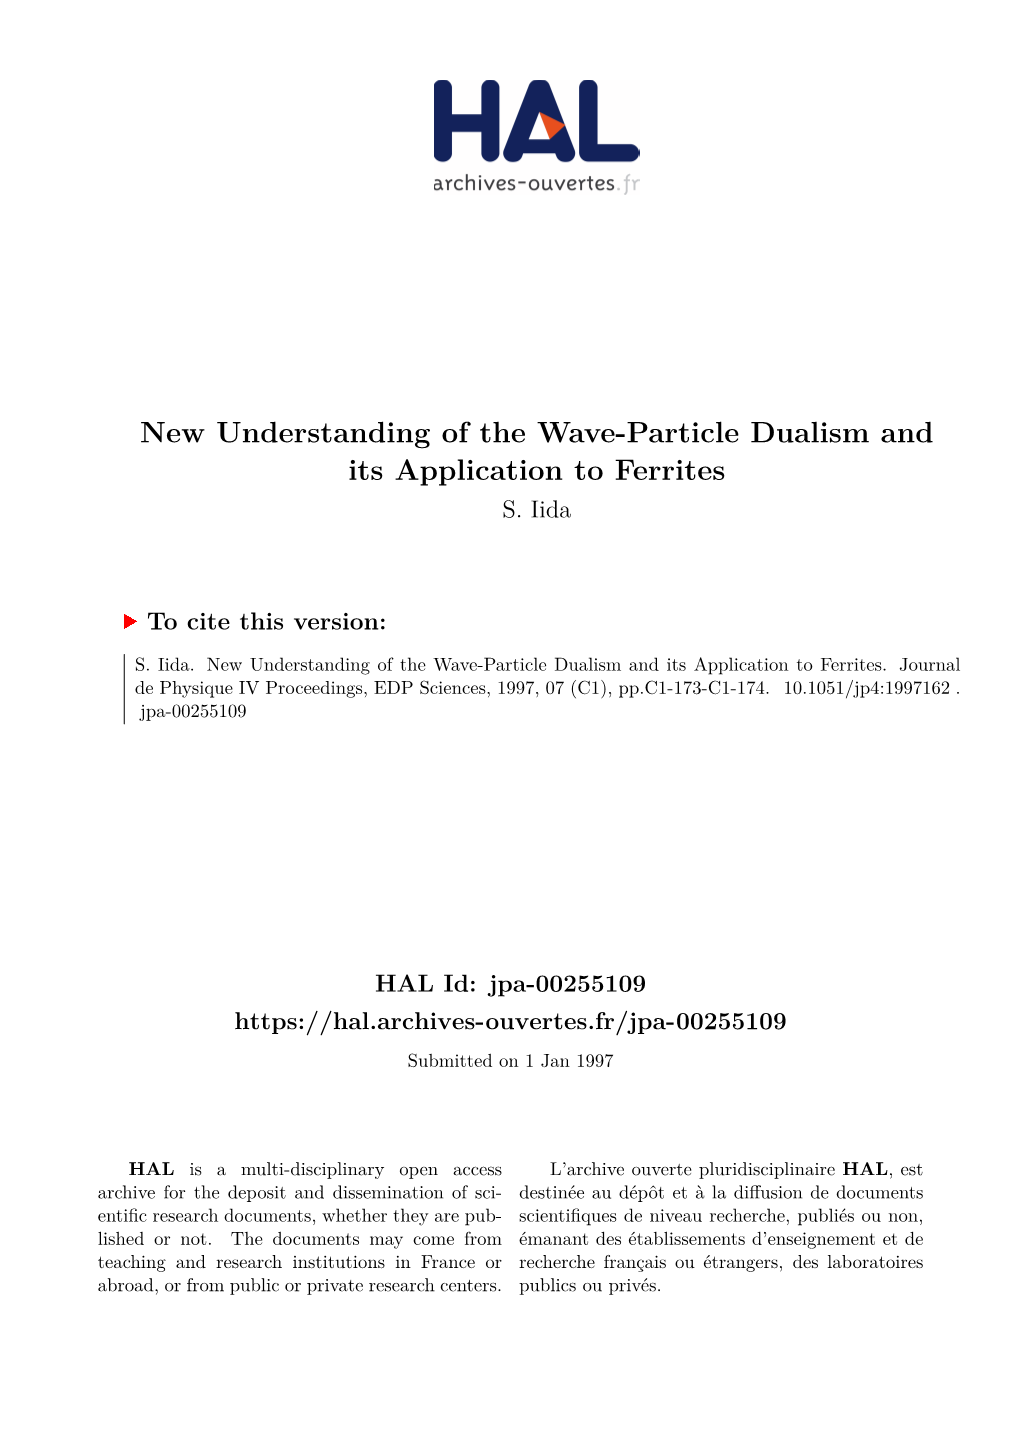 New Understanding of the Wave-Particle Dualism and Its Application to Ferrites S